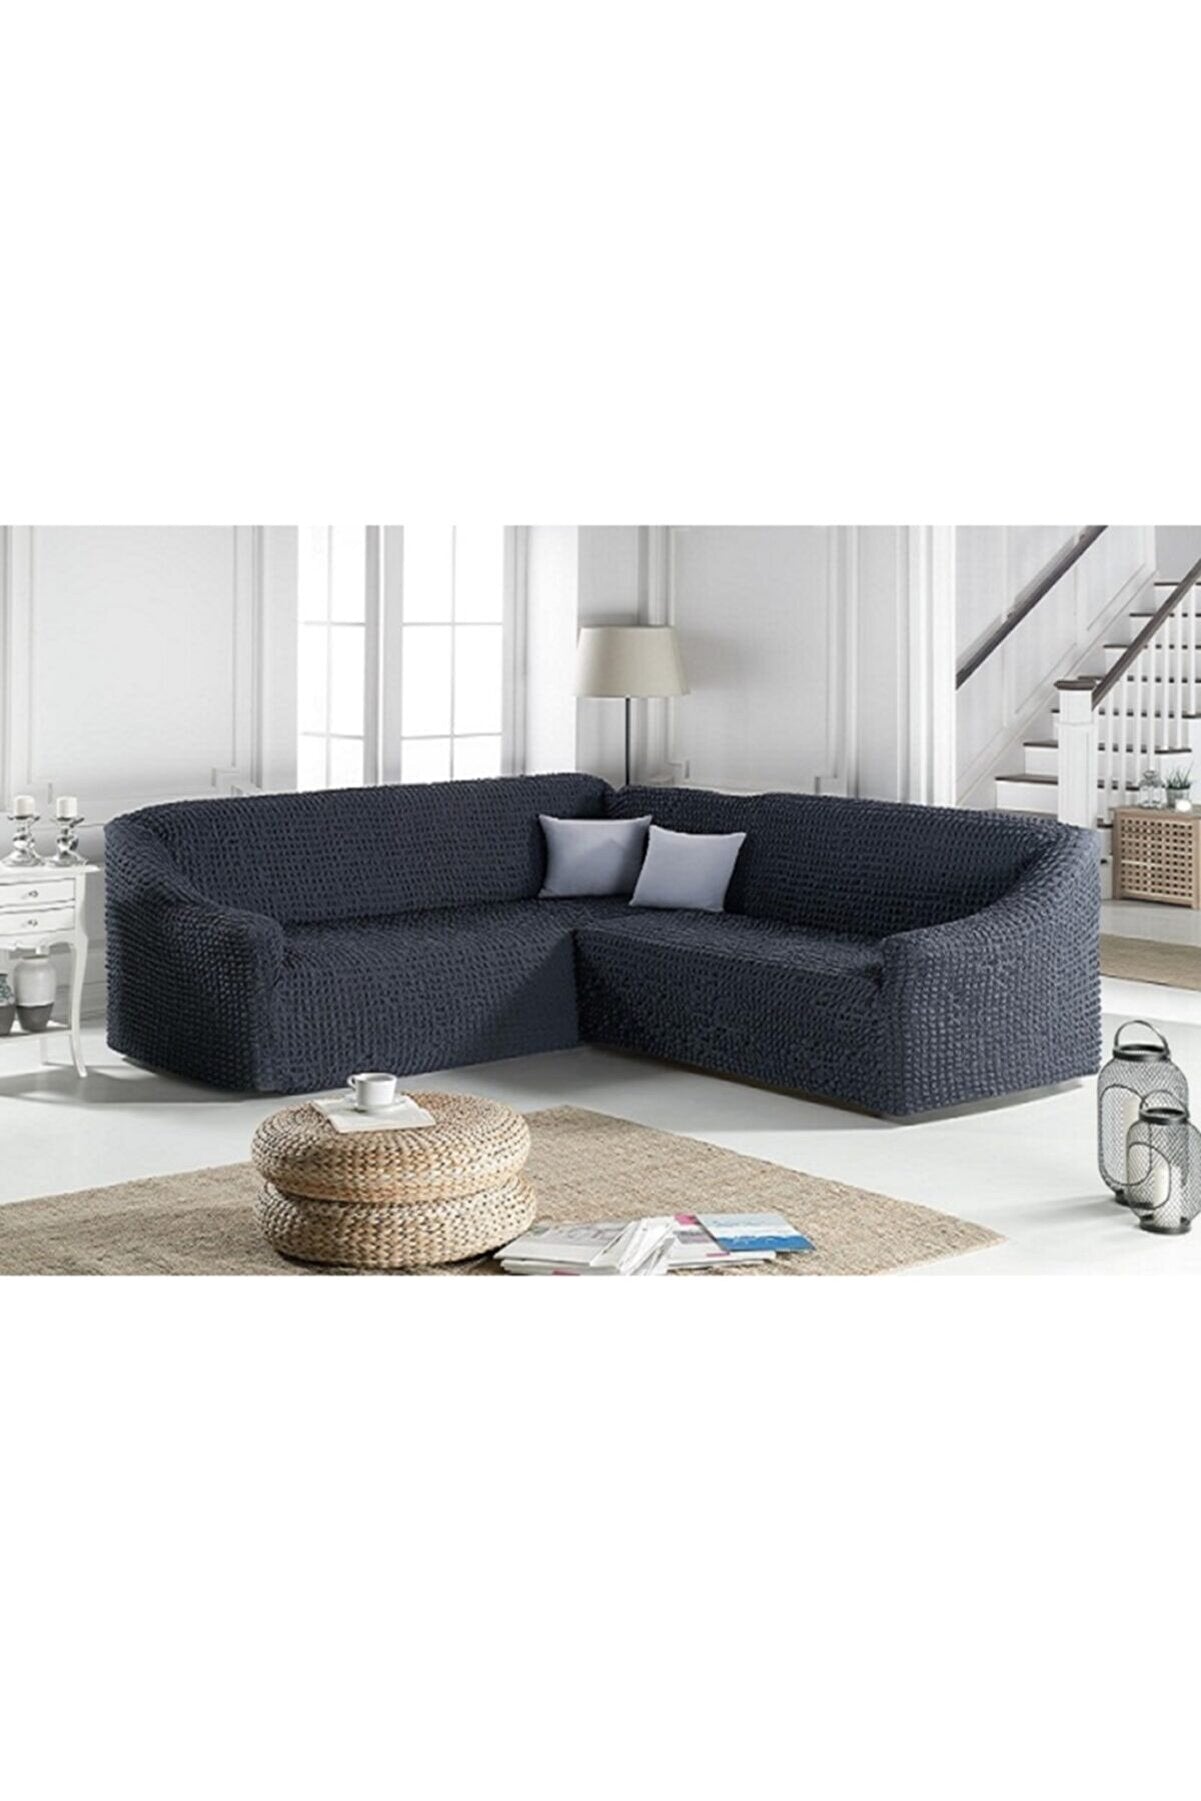 L Corner Sofa Cover, without skirt, 1 piece